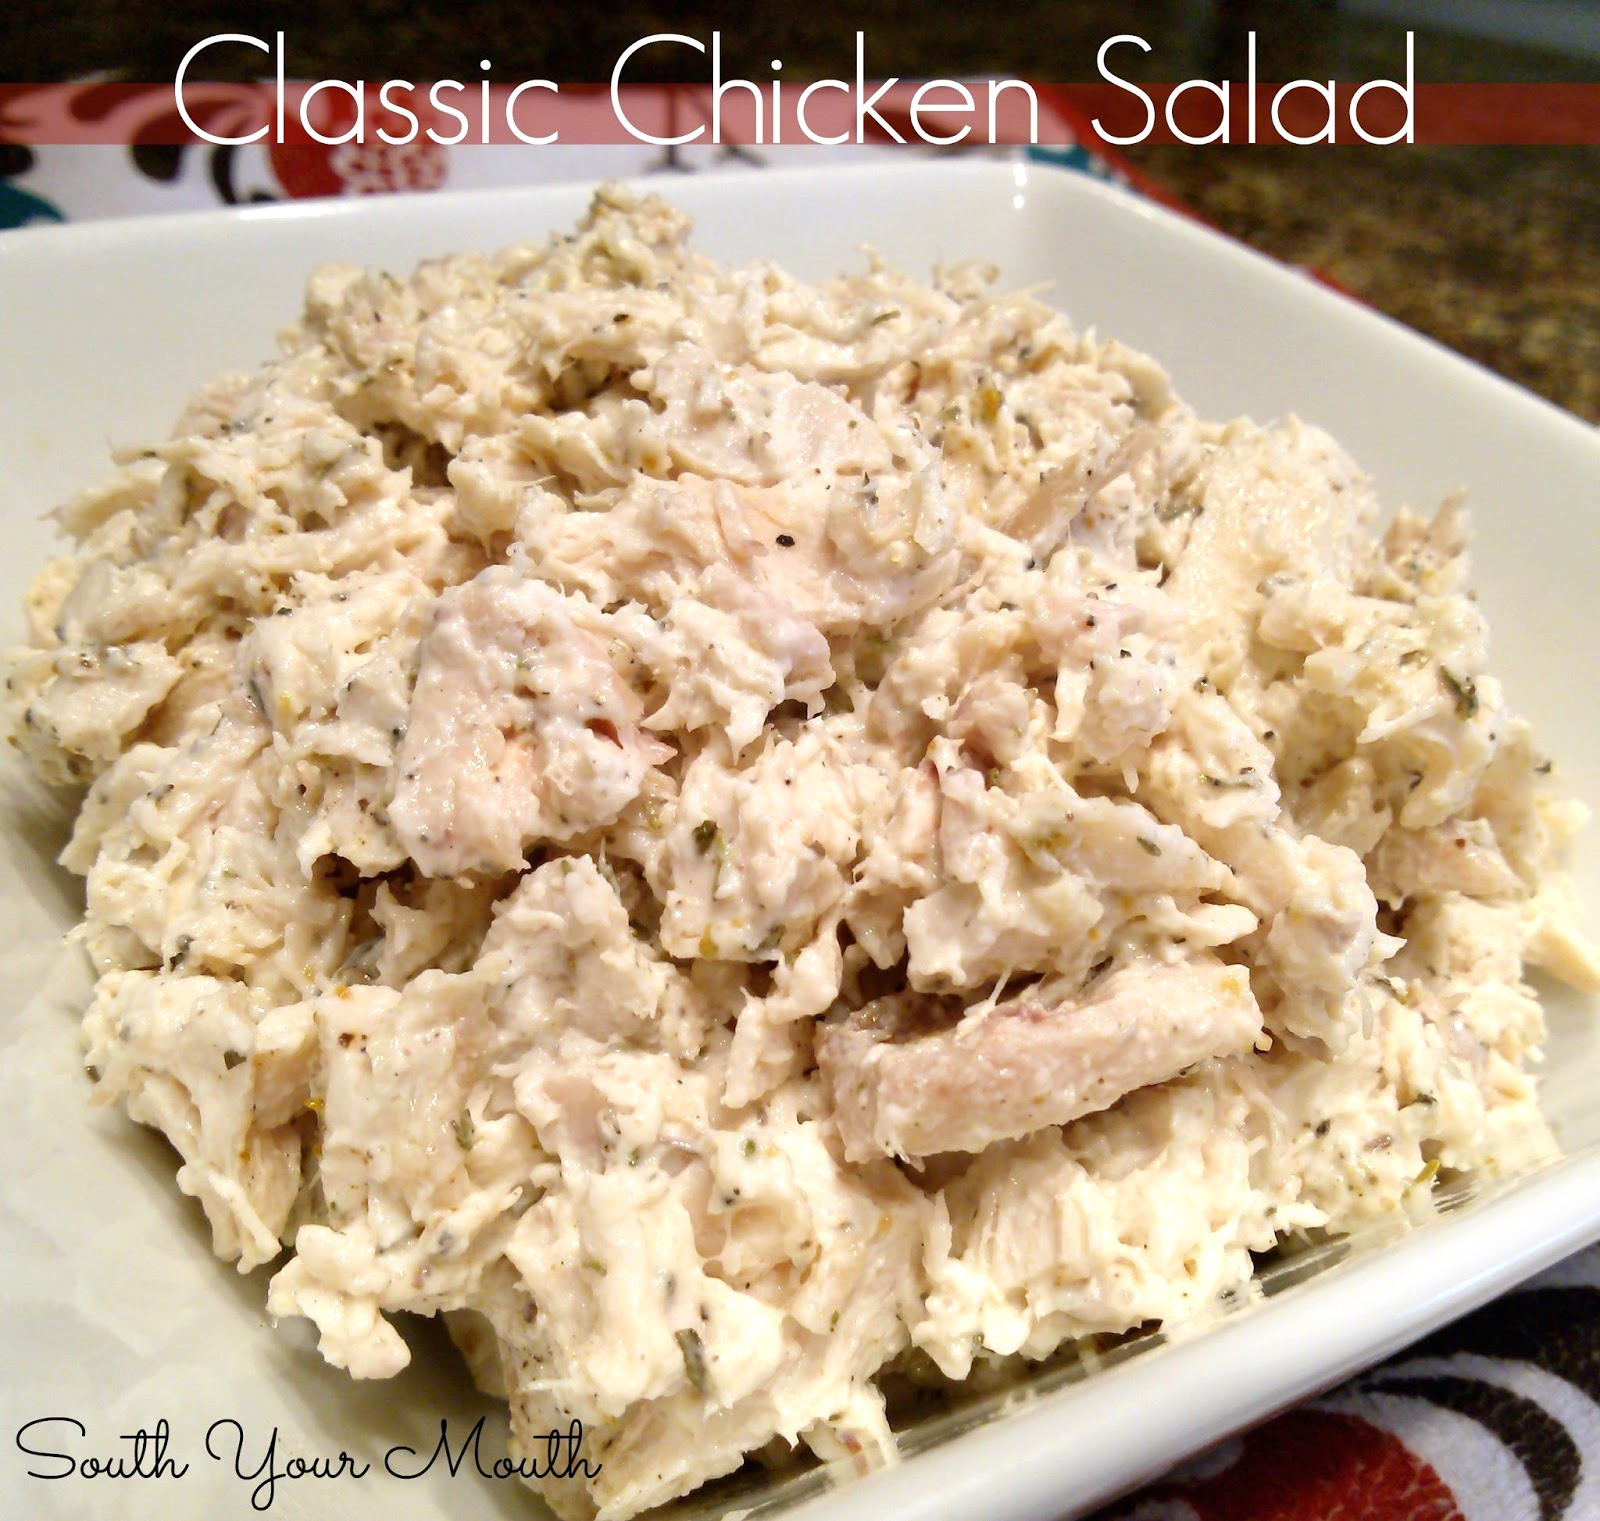 Classic Chicken Salad Recipe
 South Your Mouth Classic Chicken Salad